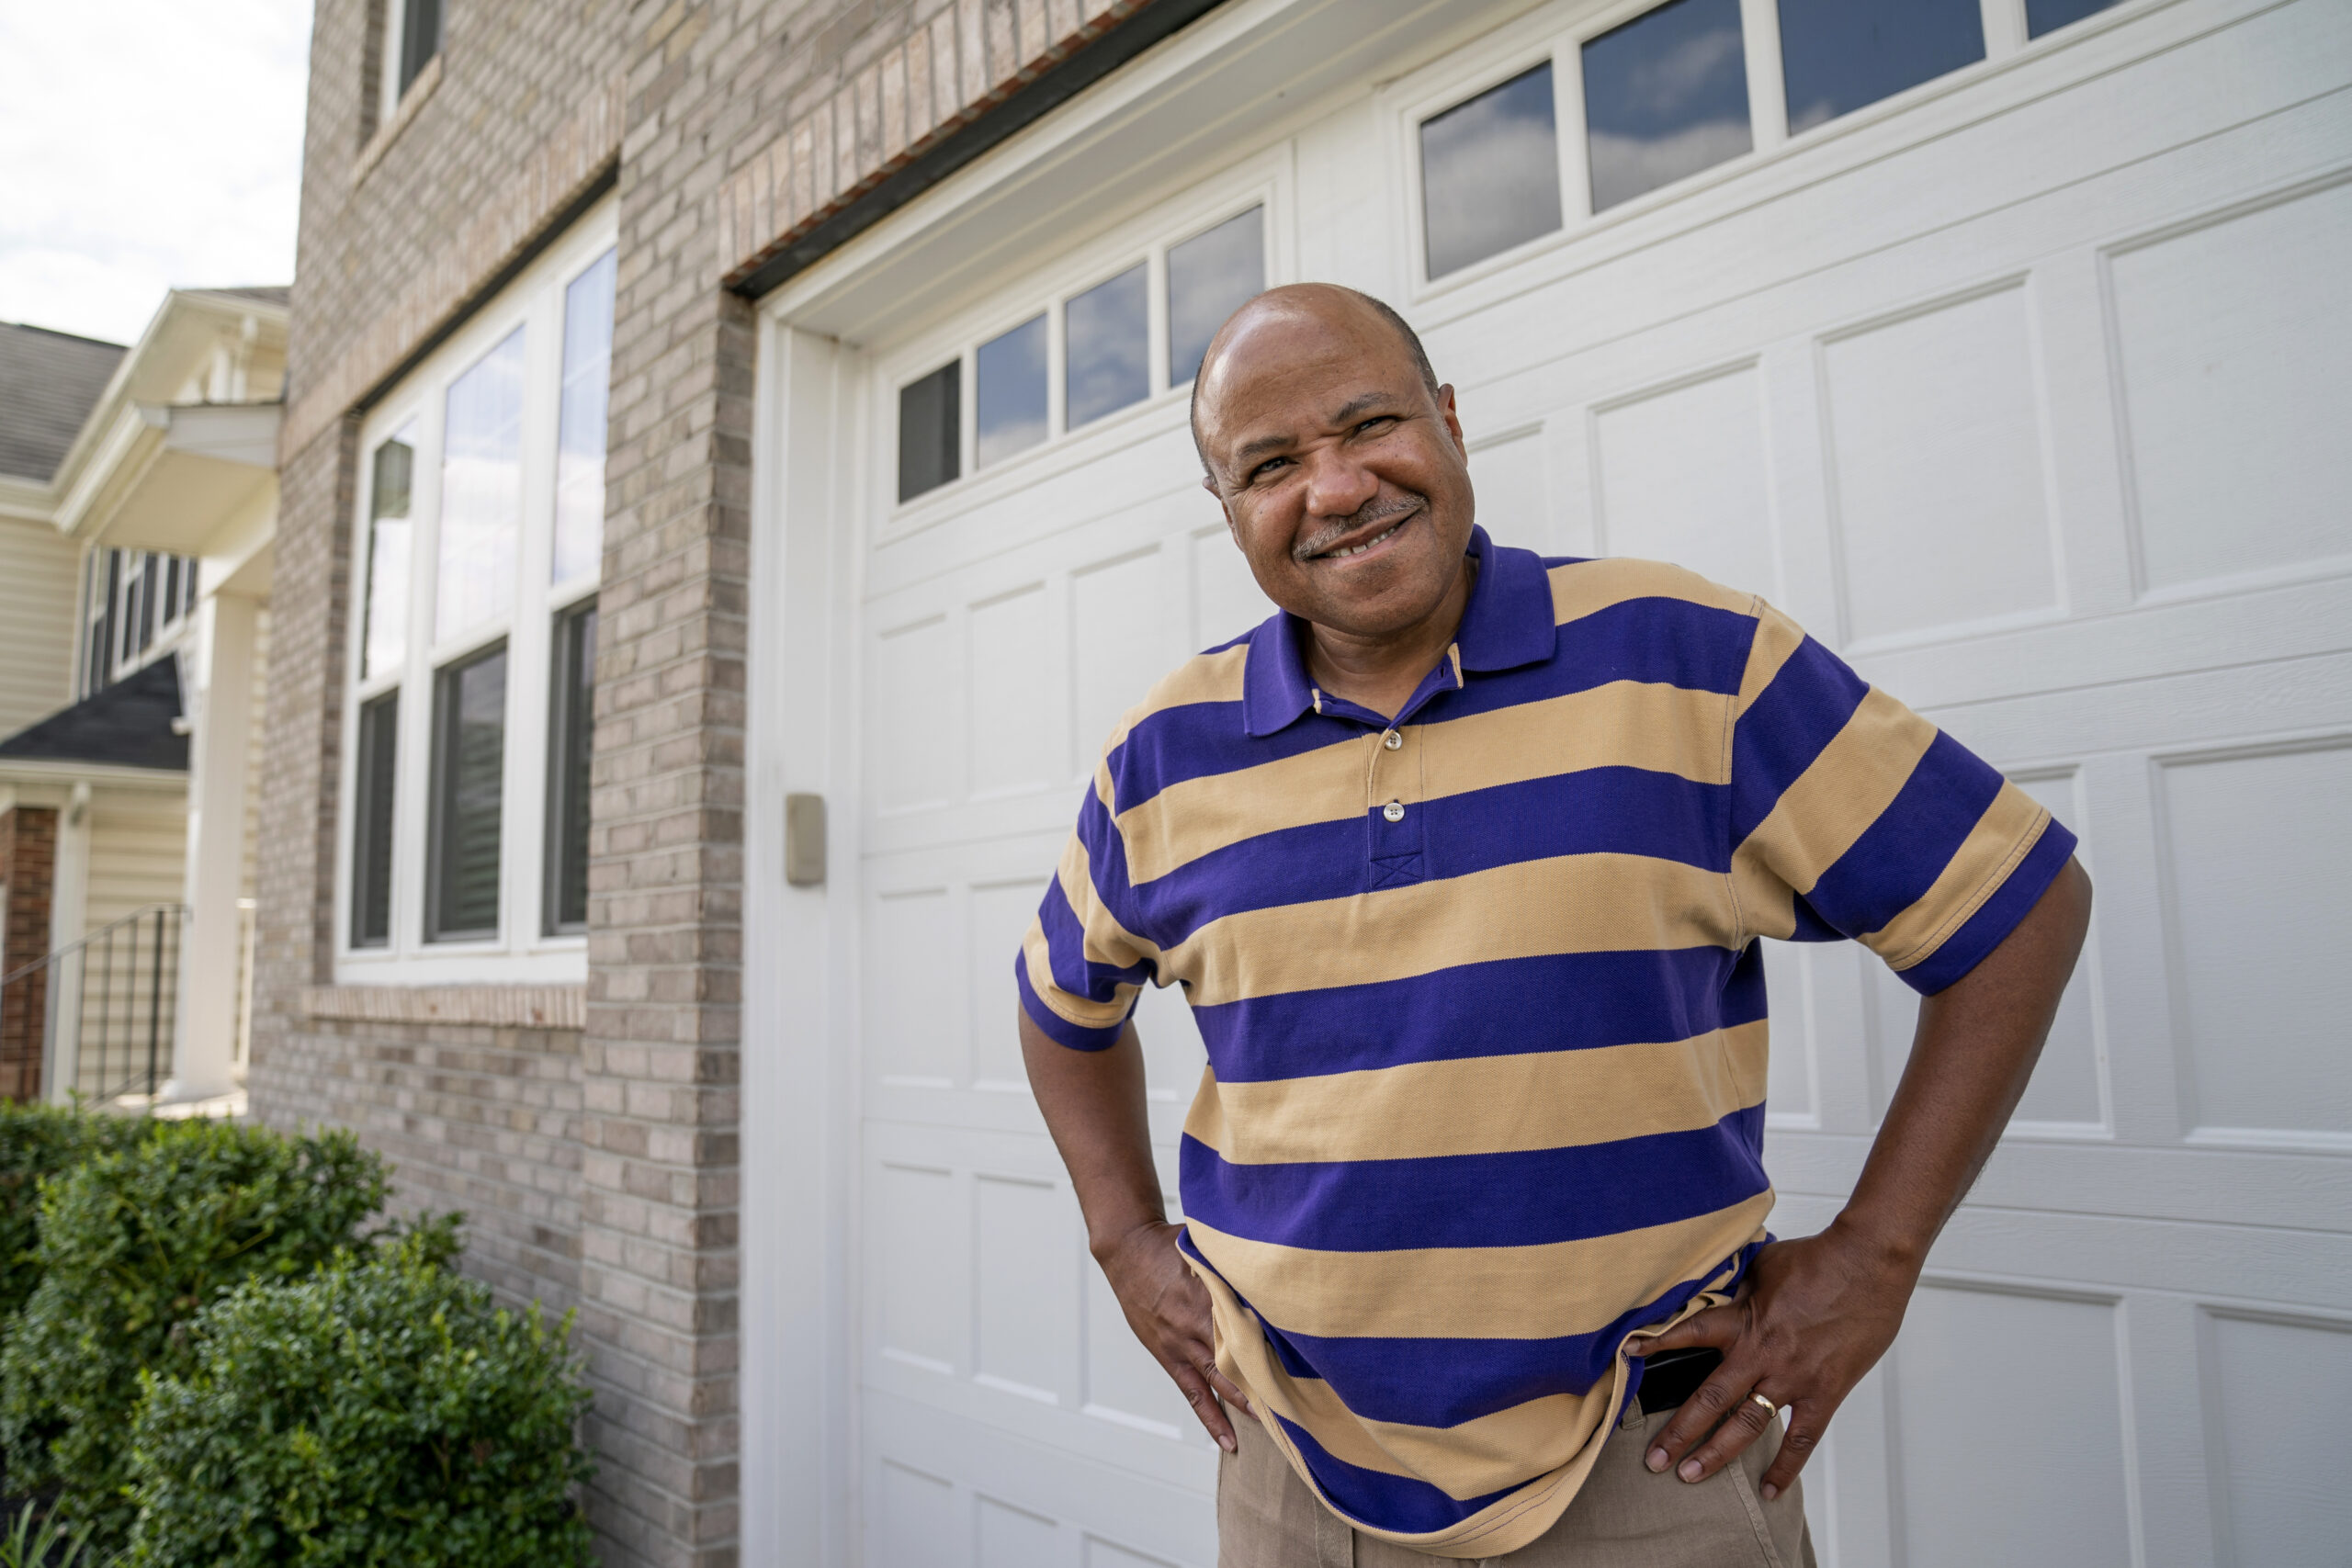 Banking executive Bob Marshall, an active stock investor, poses for a photo at his home in Ashburn, Va., Friday, Aug. 7, 2020. Nearly half of all U.S. households don’t own any stocks, and a disproportionate number of them are from Black and other racial-minority households. Differences in financial-literacy education may be one factor, Marshall said. Or, because fewer Black families have wealth that has carried through generations, they may be more wary of risky investments. (AP Photo/J. Scott Applewhite)